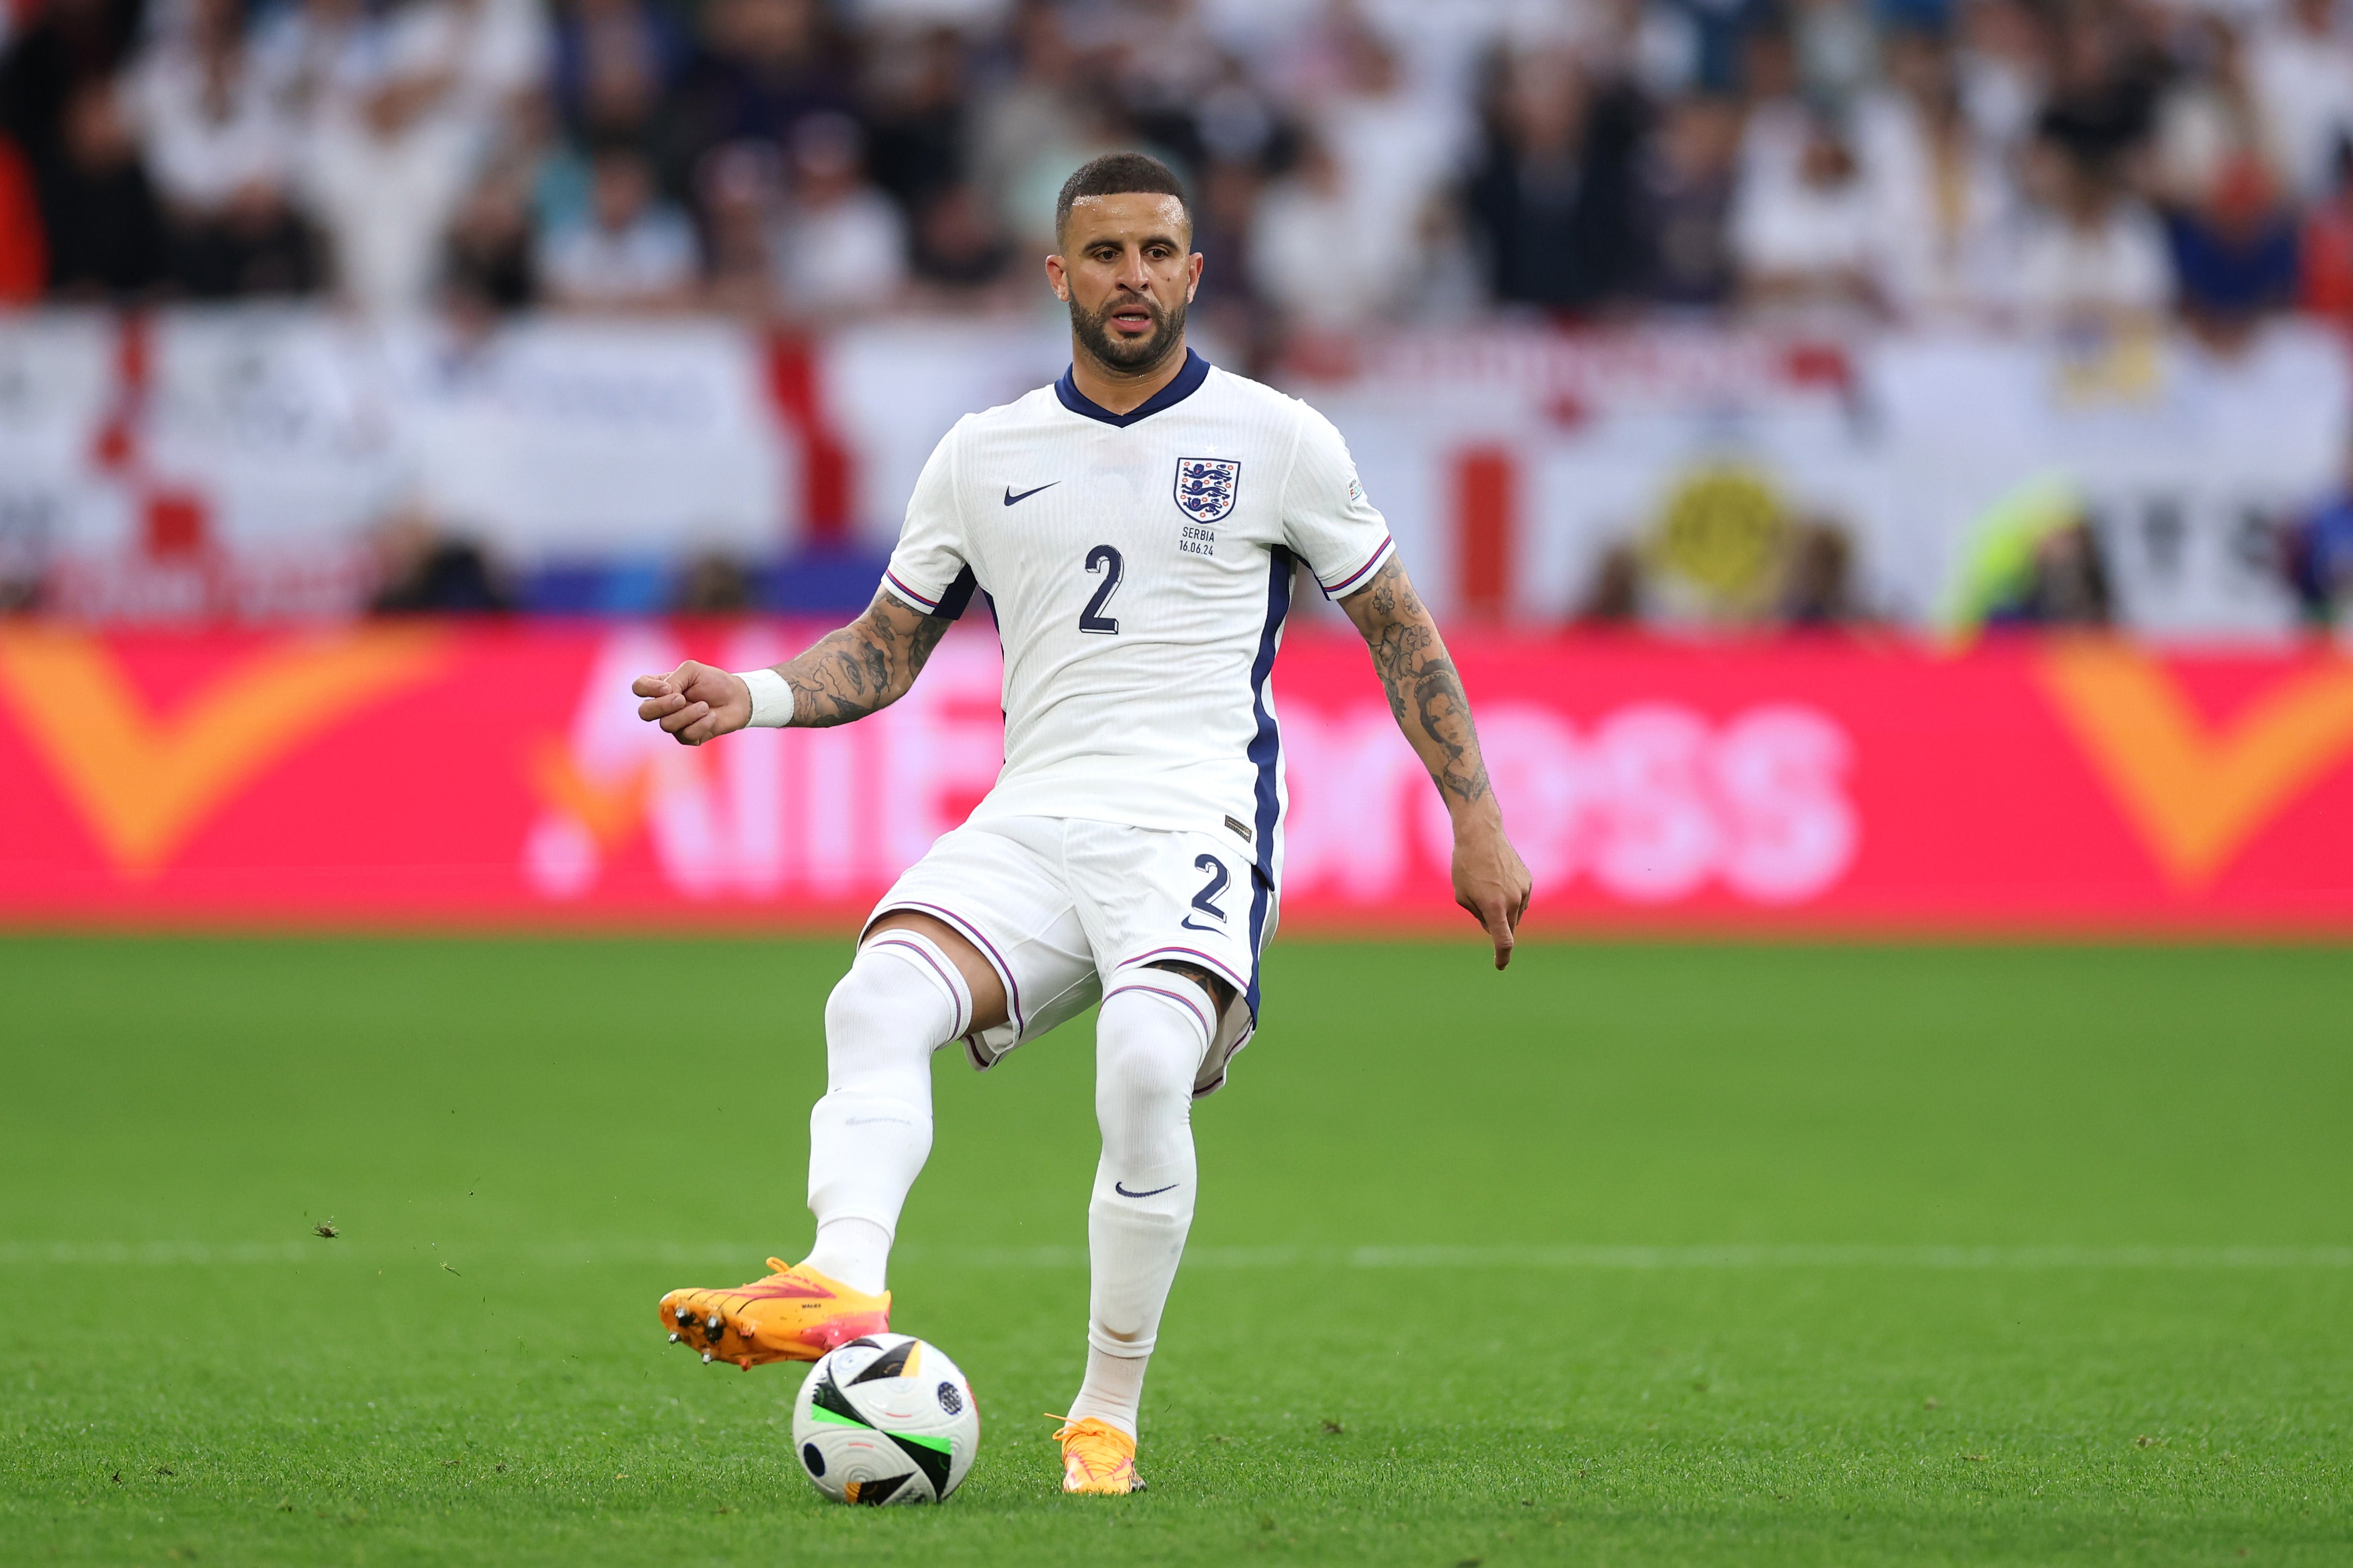 Kyle Walker doesn’t read or listen to discussion about England during a tournament